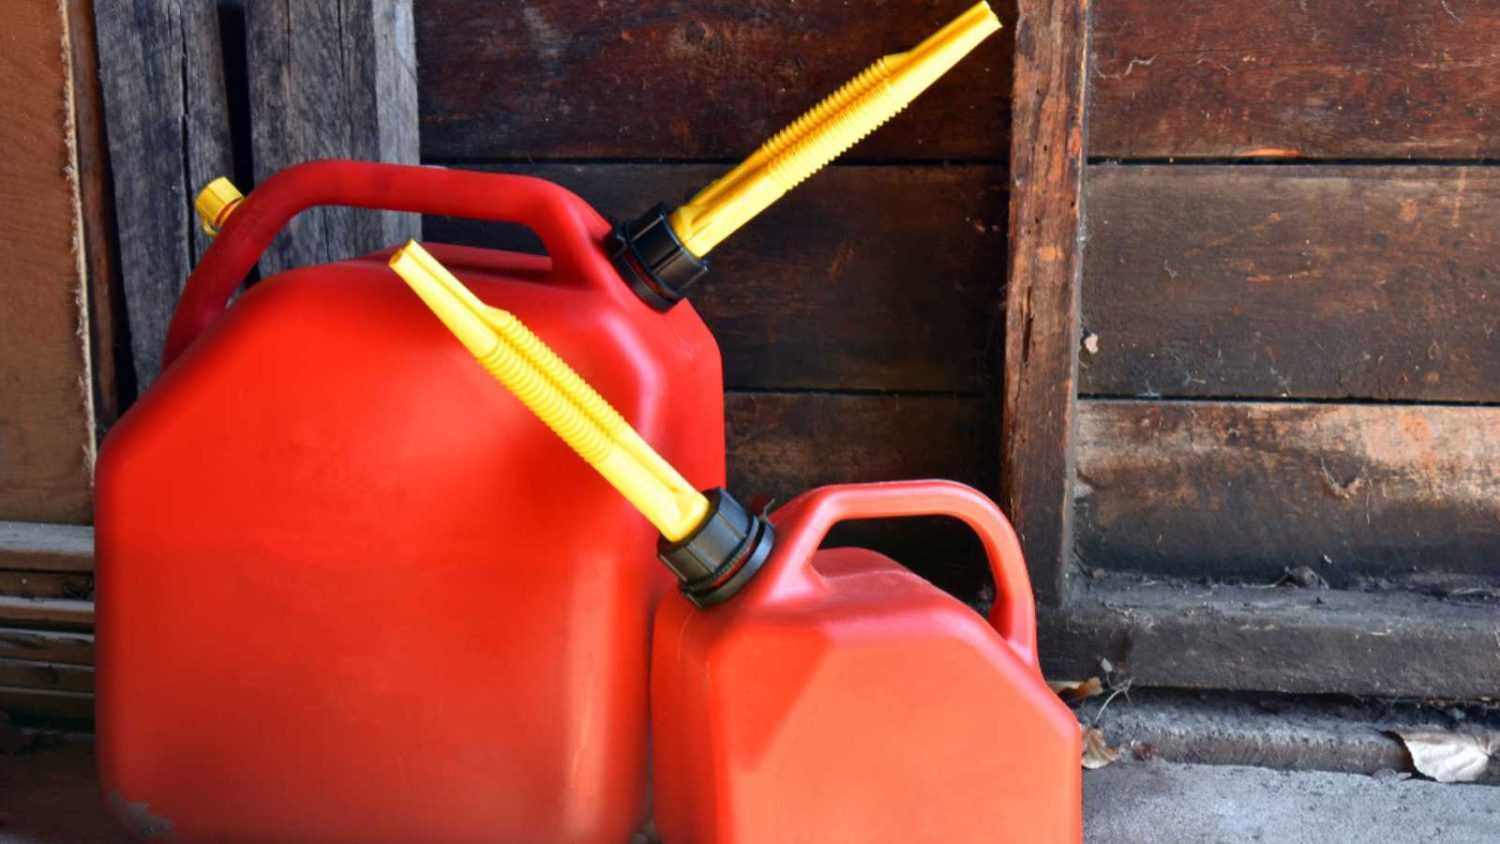 An image of two red plastic gas canisters.